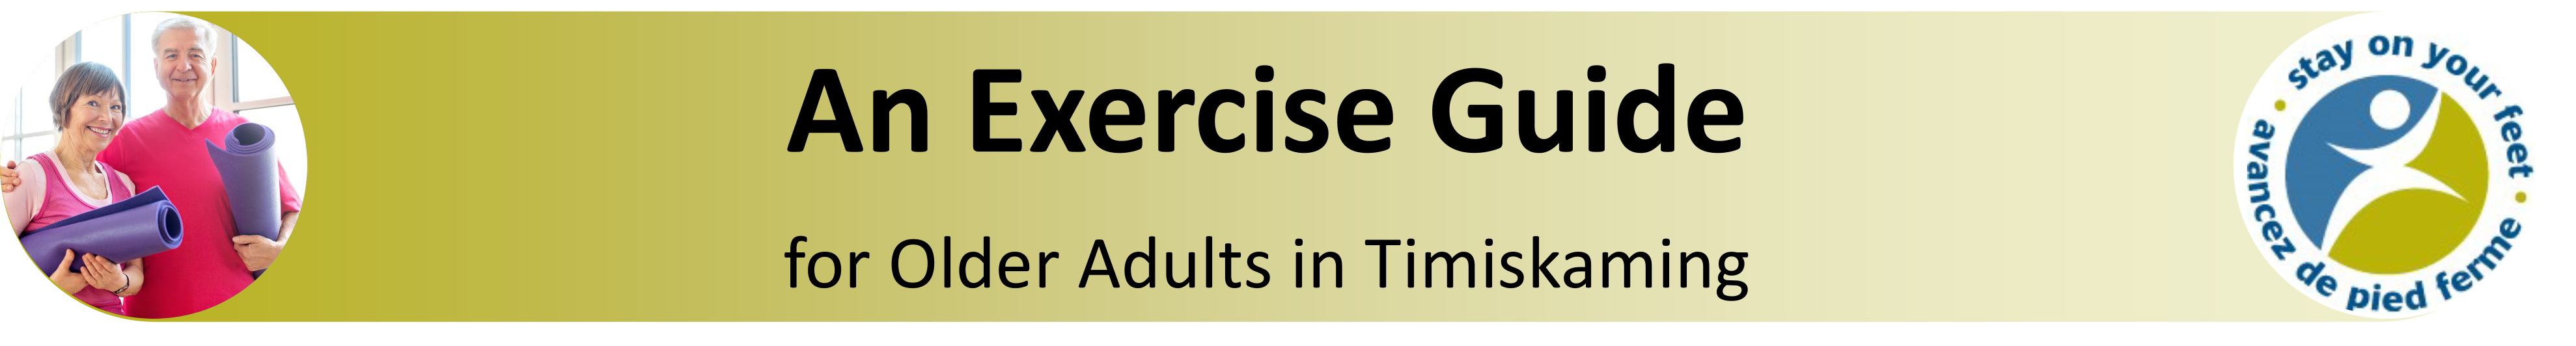 An Exercise Guide for Older Adults in Timiskaming - PDF document